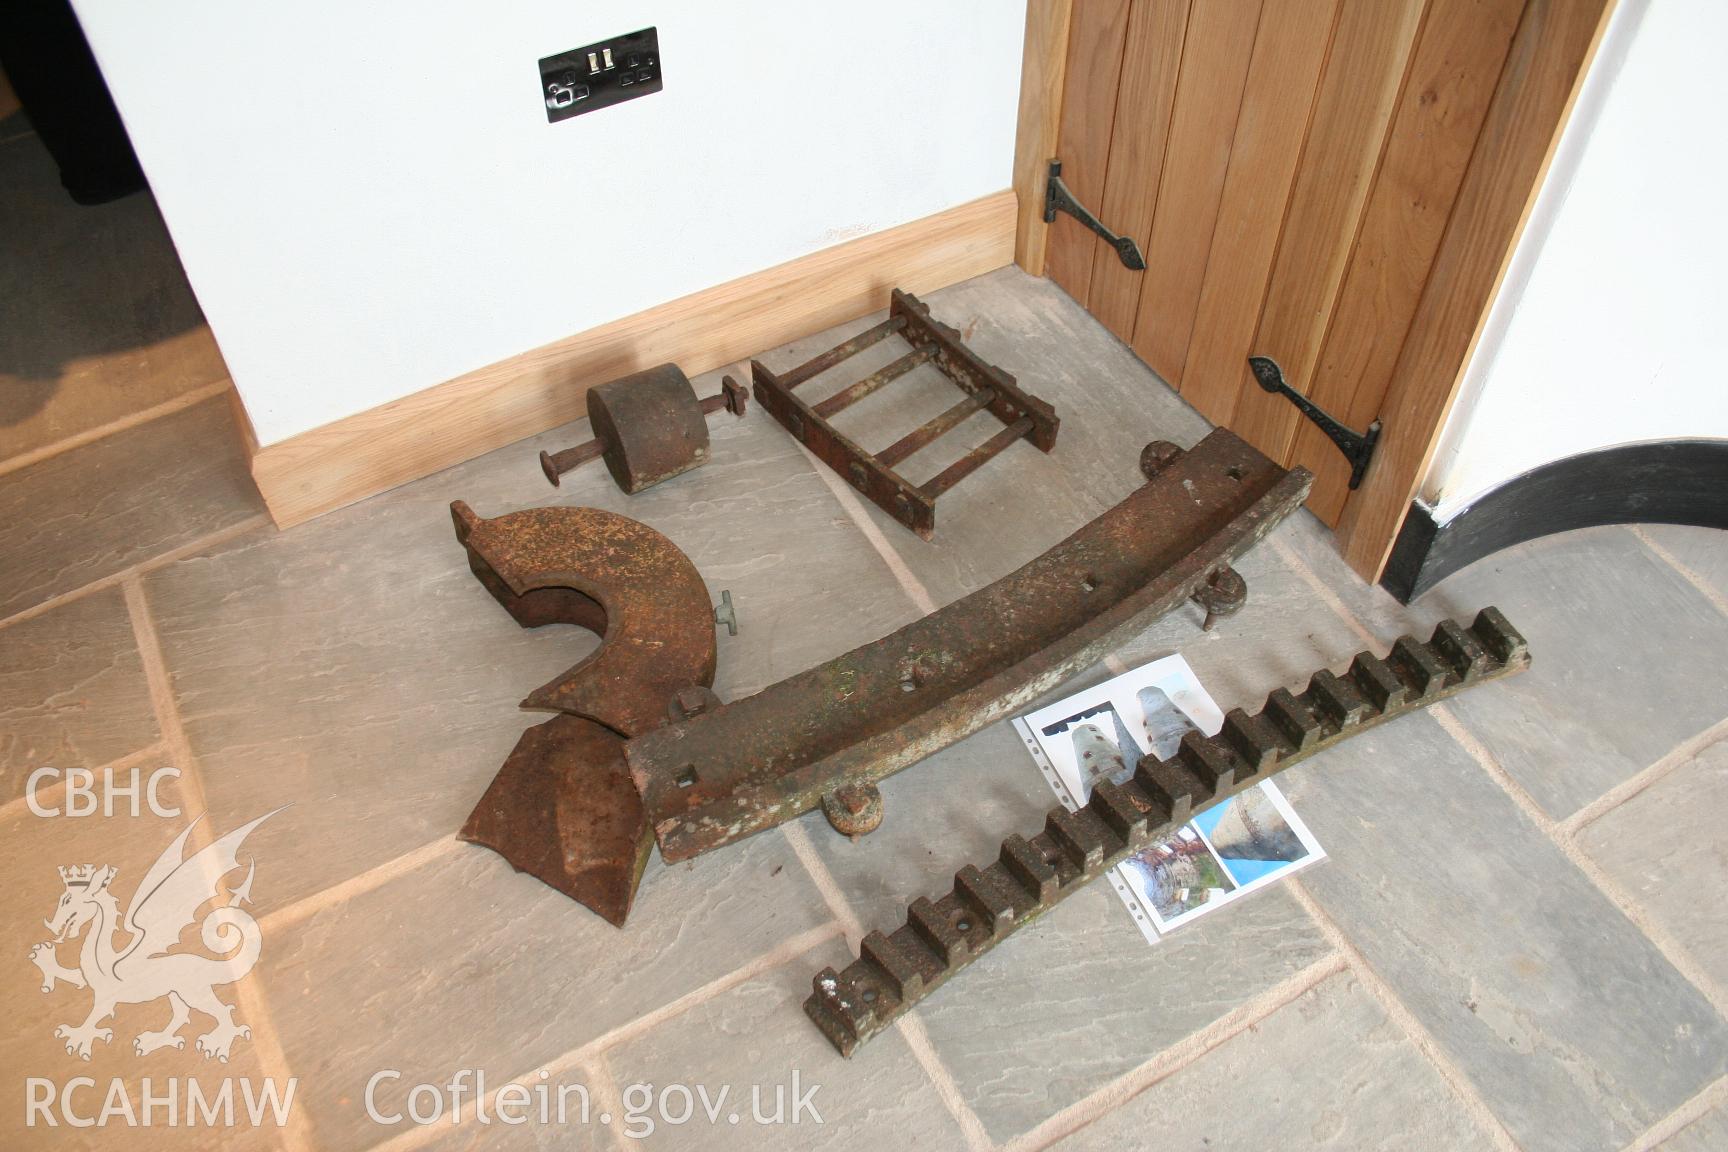 Iron finds at Llancayo Windmill, taken by Brian Malaws on 18 October 2008.